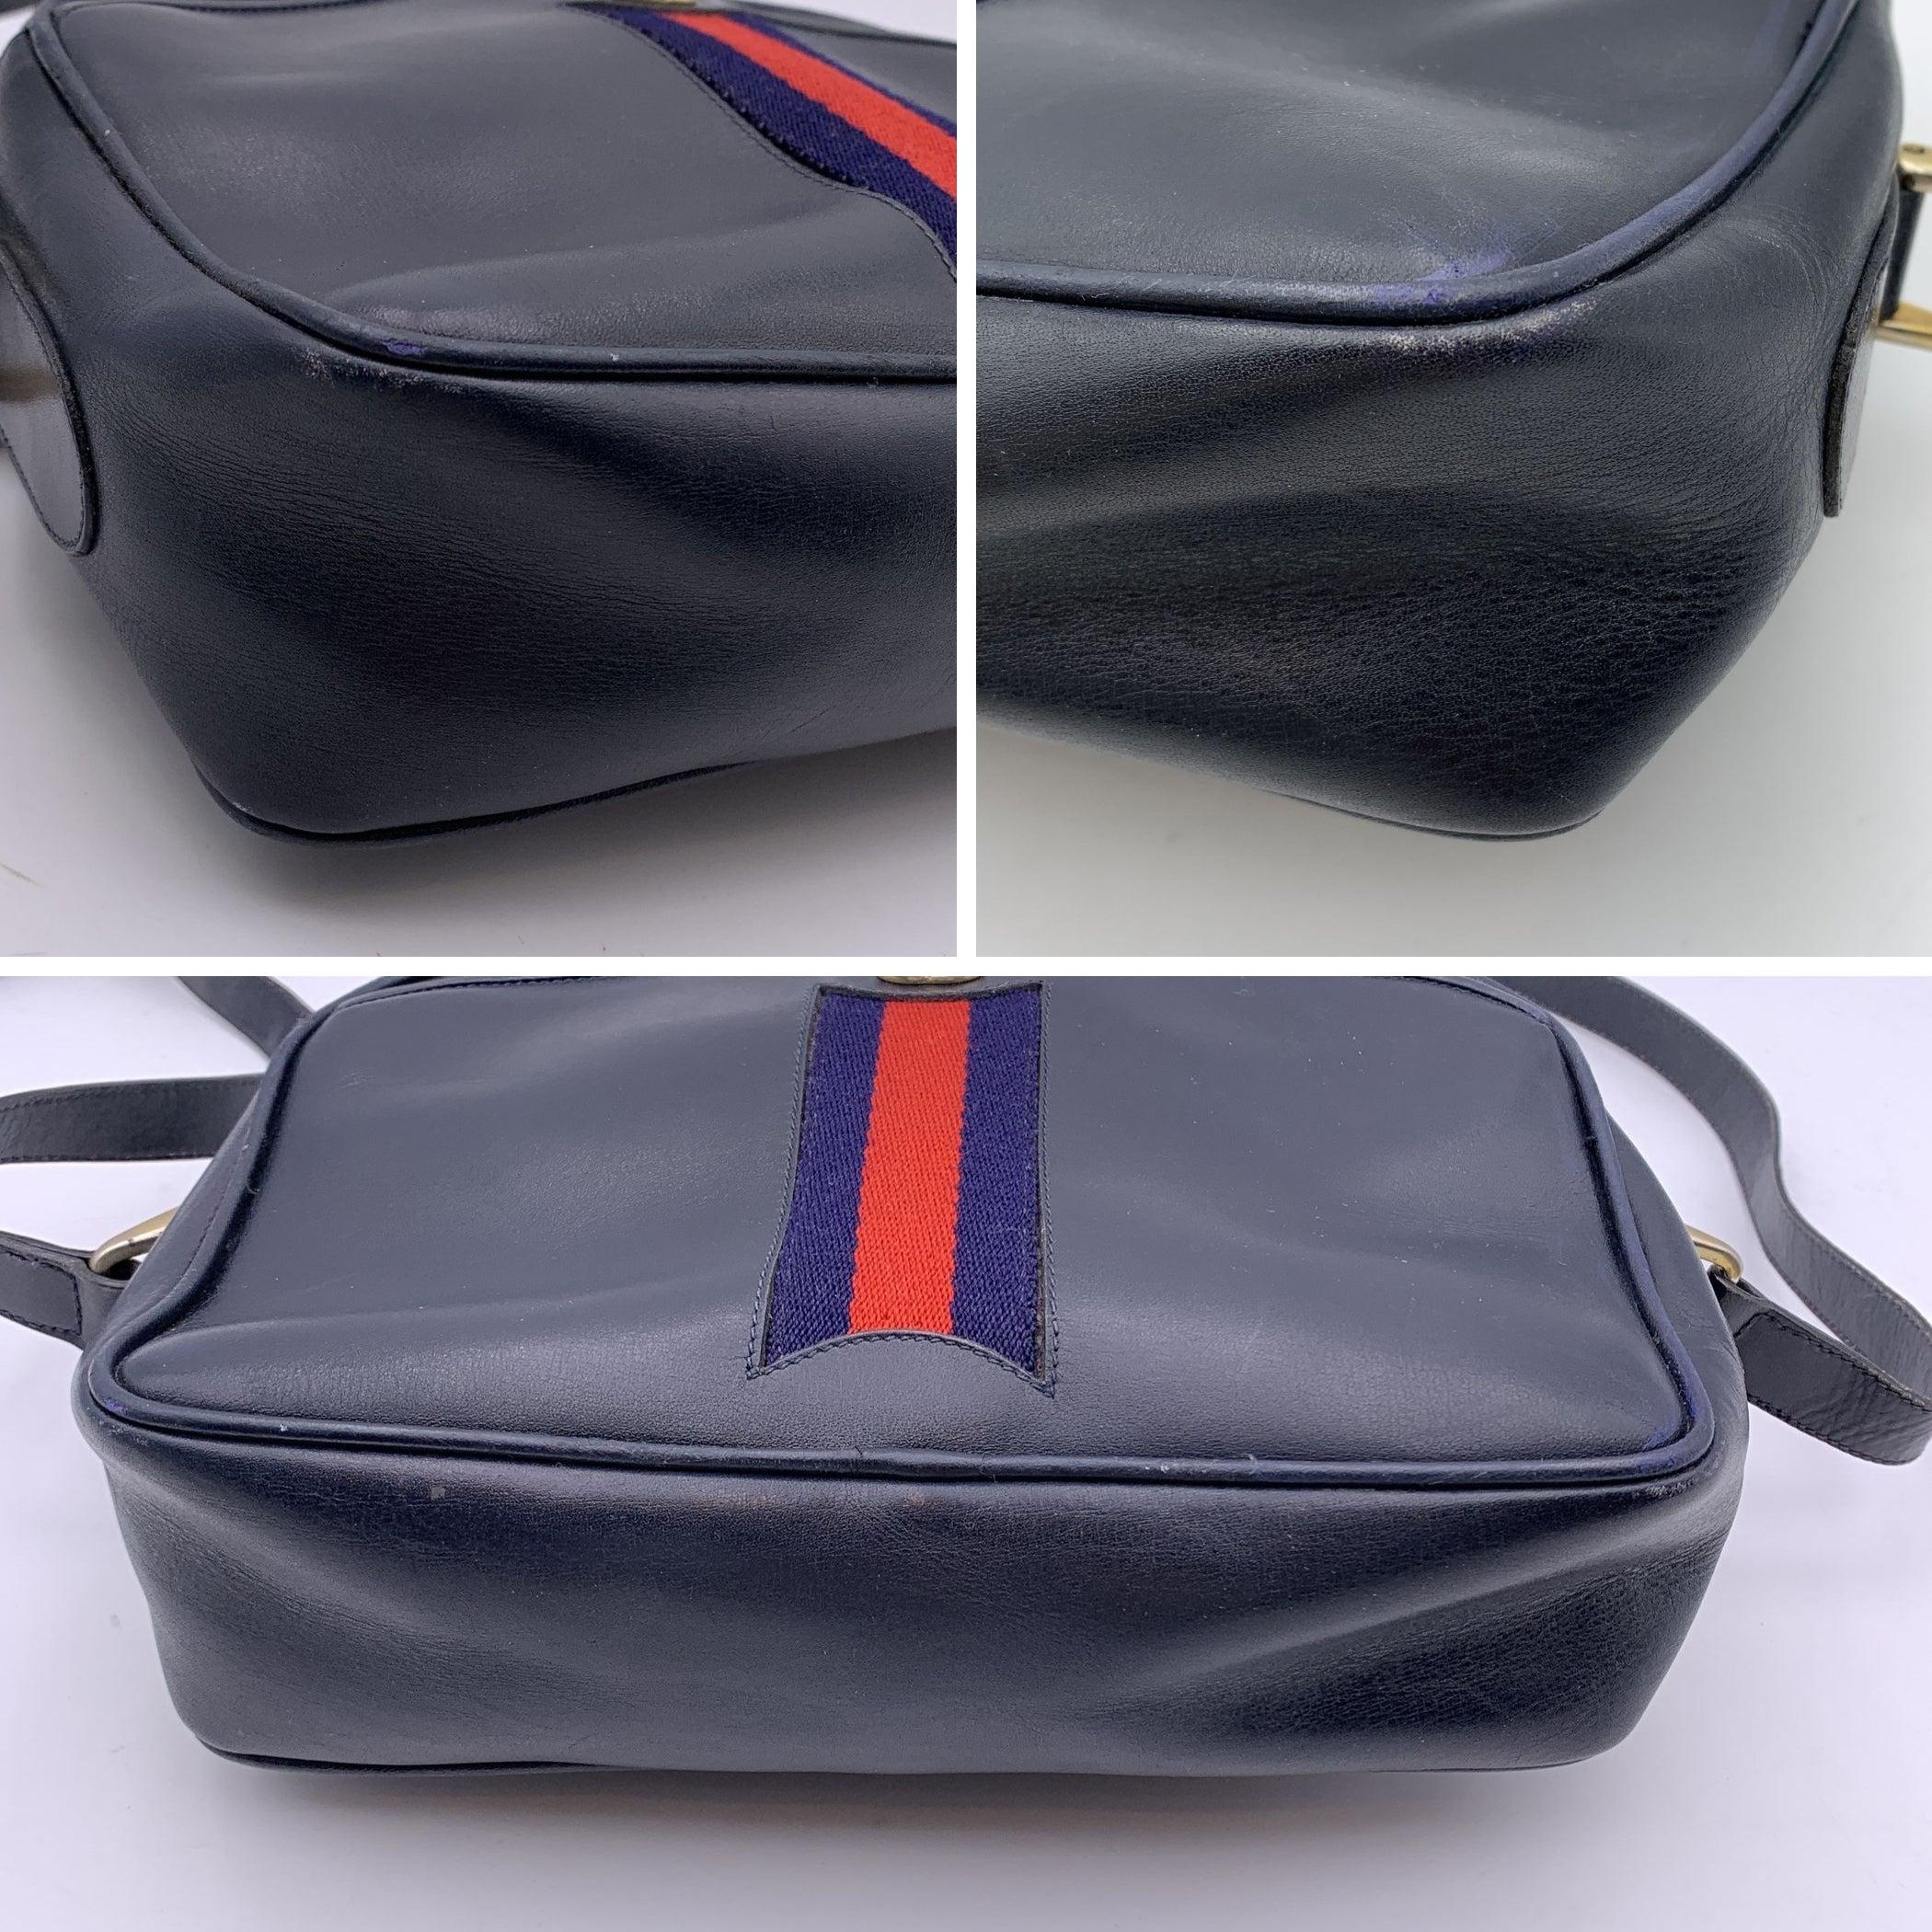 Women's Gucci Vintage Blue Leather Messenger Crossbody Bag with Stripes For Sale